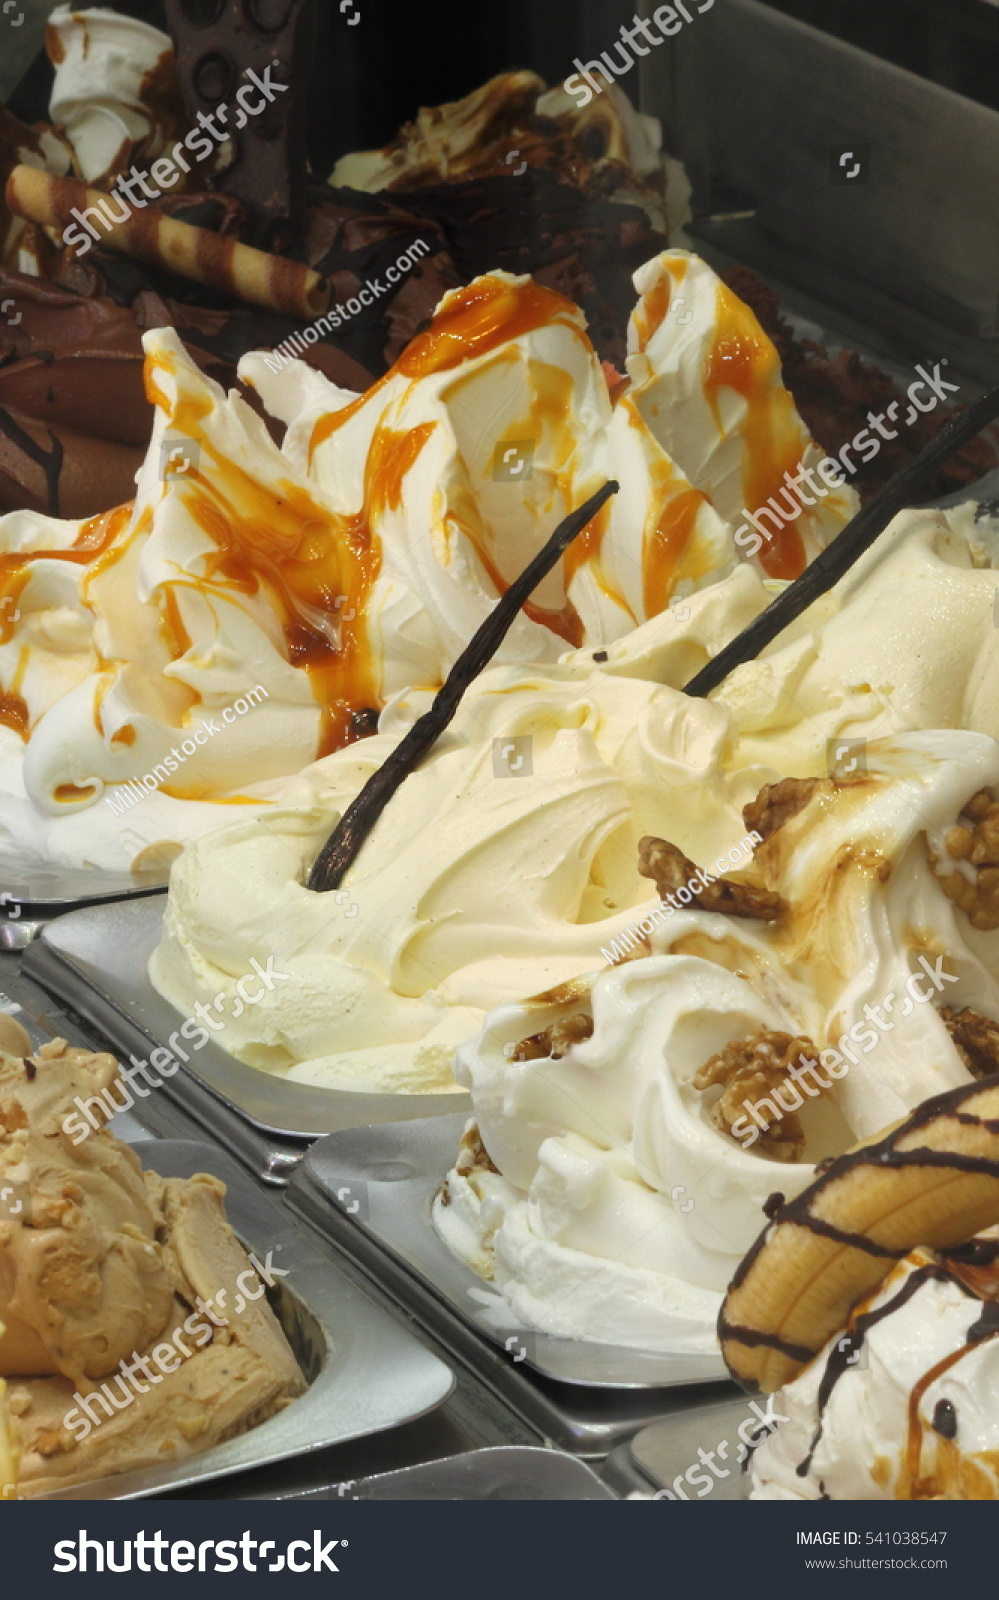 Different Flavors In A Ice Cream Parlor Stock Photo 541038547